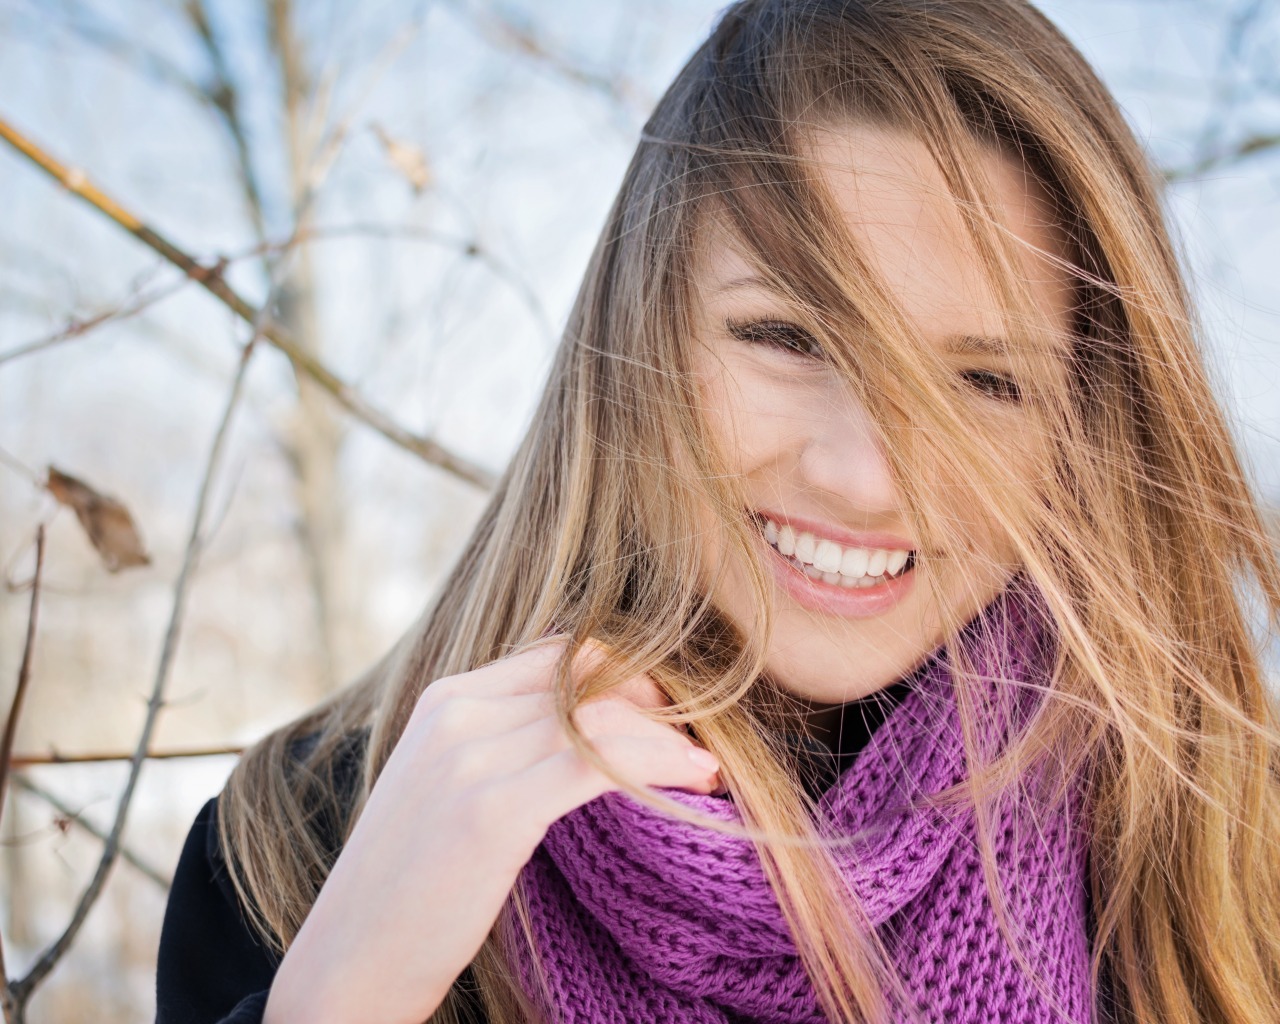 Women Blonde Hair In Face Smiling Open Mouth Closeup Scarf Happy Happiness 1280x1024